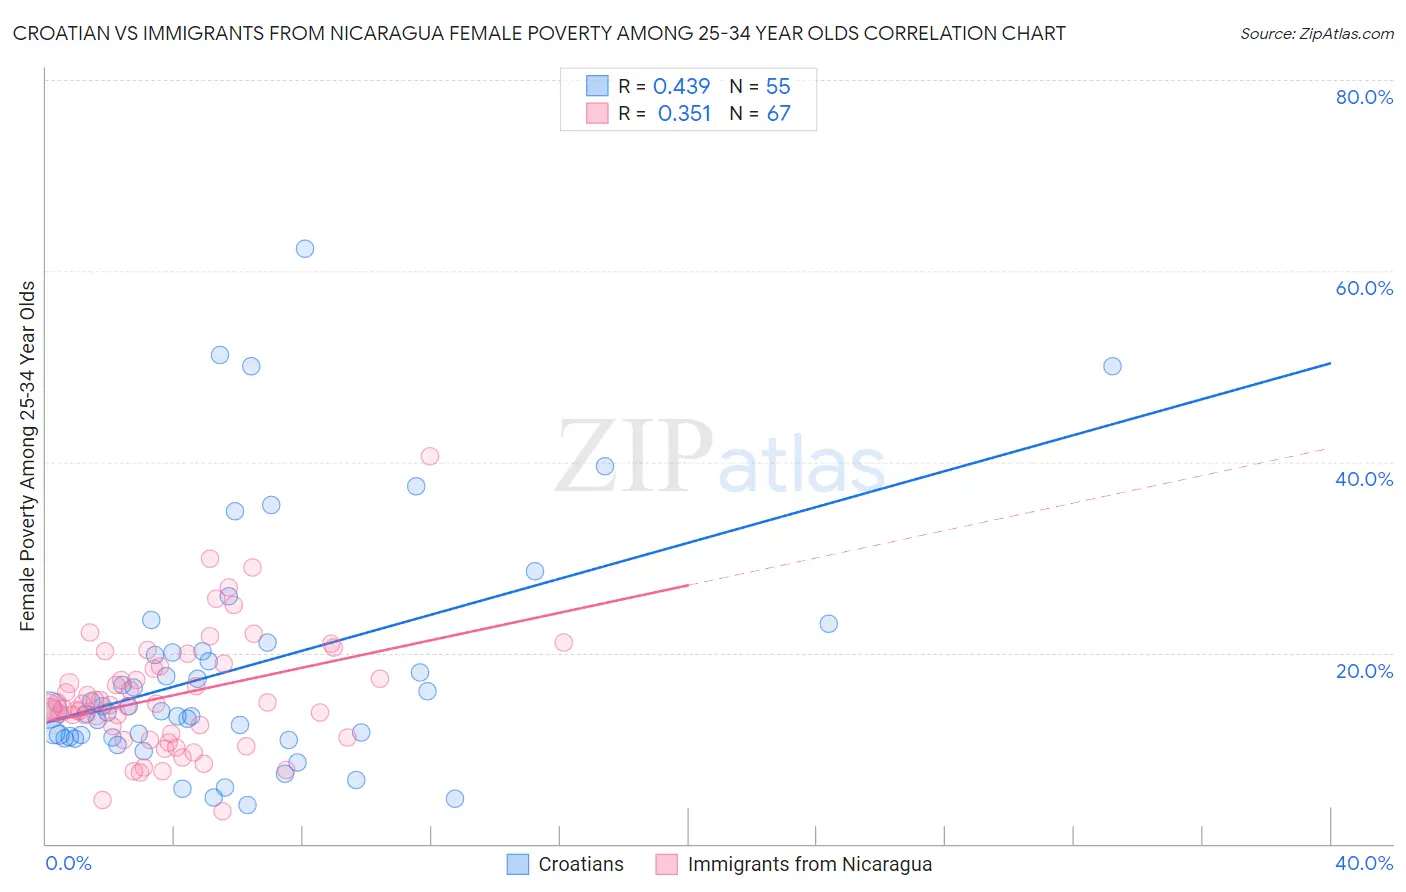 Croatian vs Immigrants from Nicaragua Female Poverty Among 25-34 Year Olds